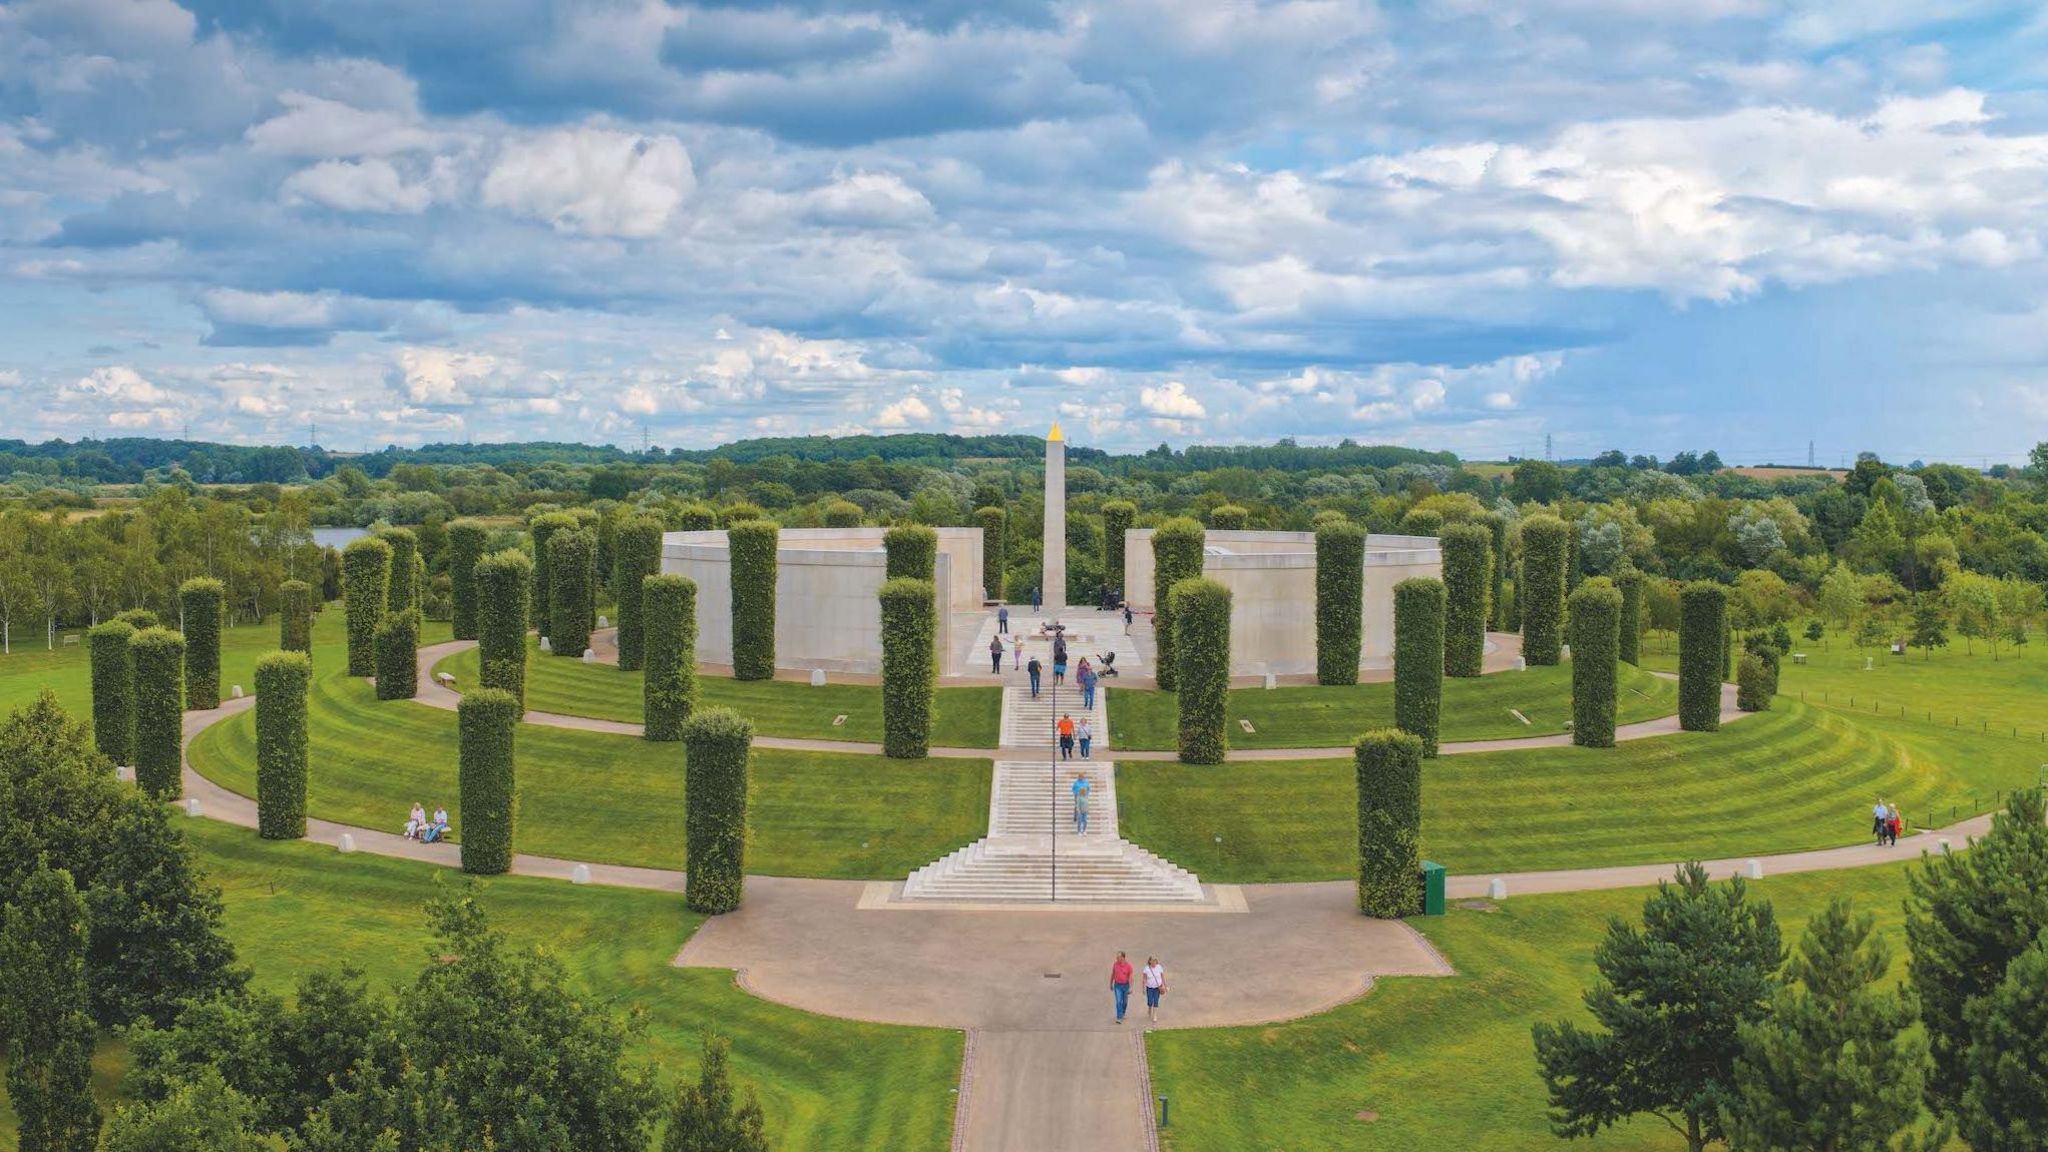 An aerial picture of the National Memorial Arboretum in Staffordshire